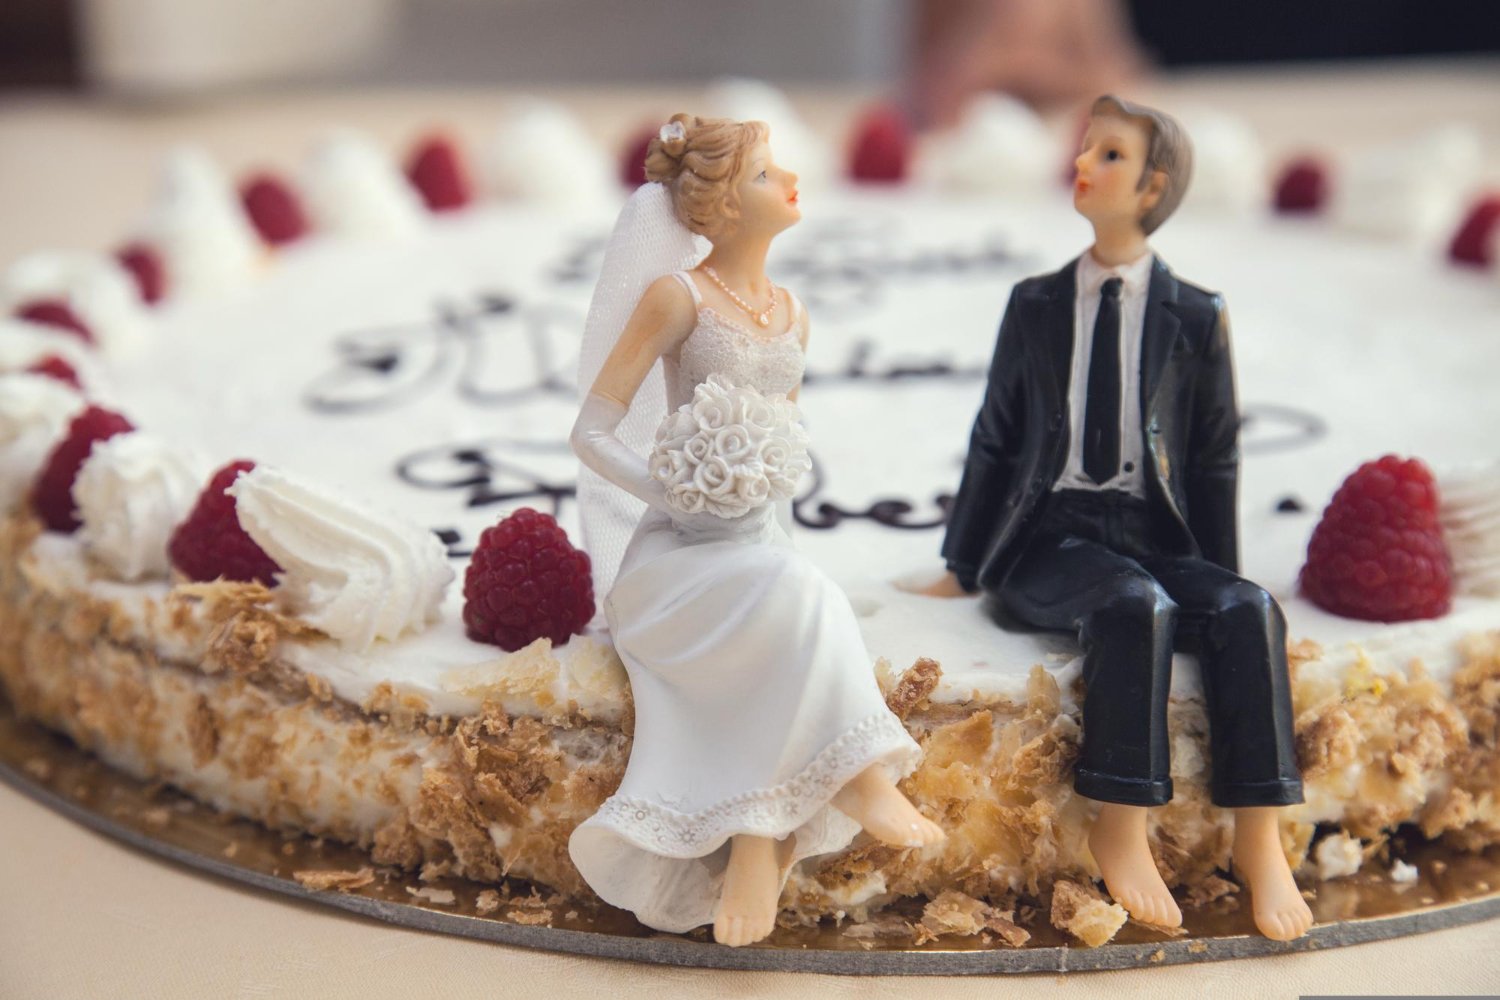 a wedding cake with a figurine of a bride and groom on top of it.